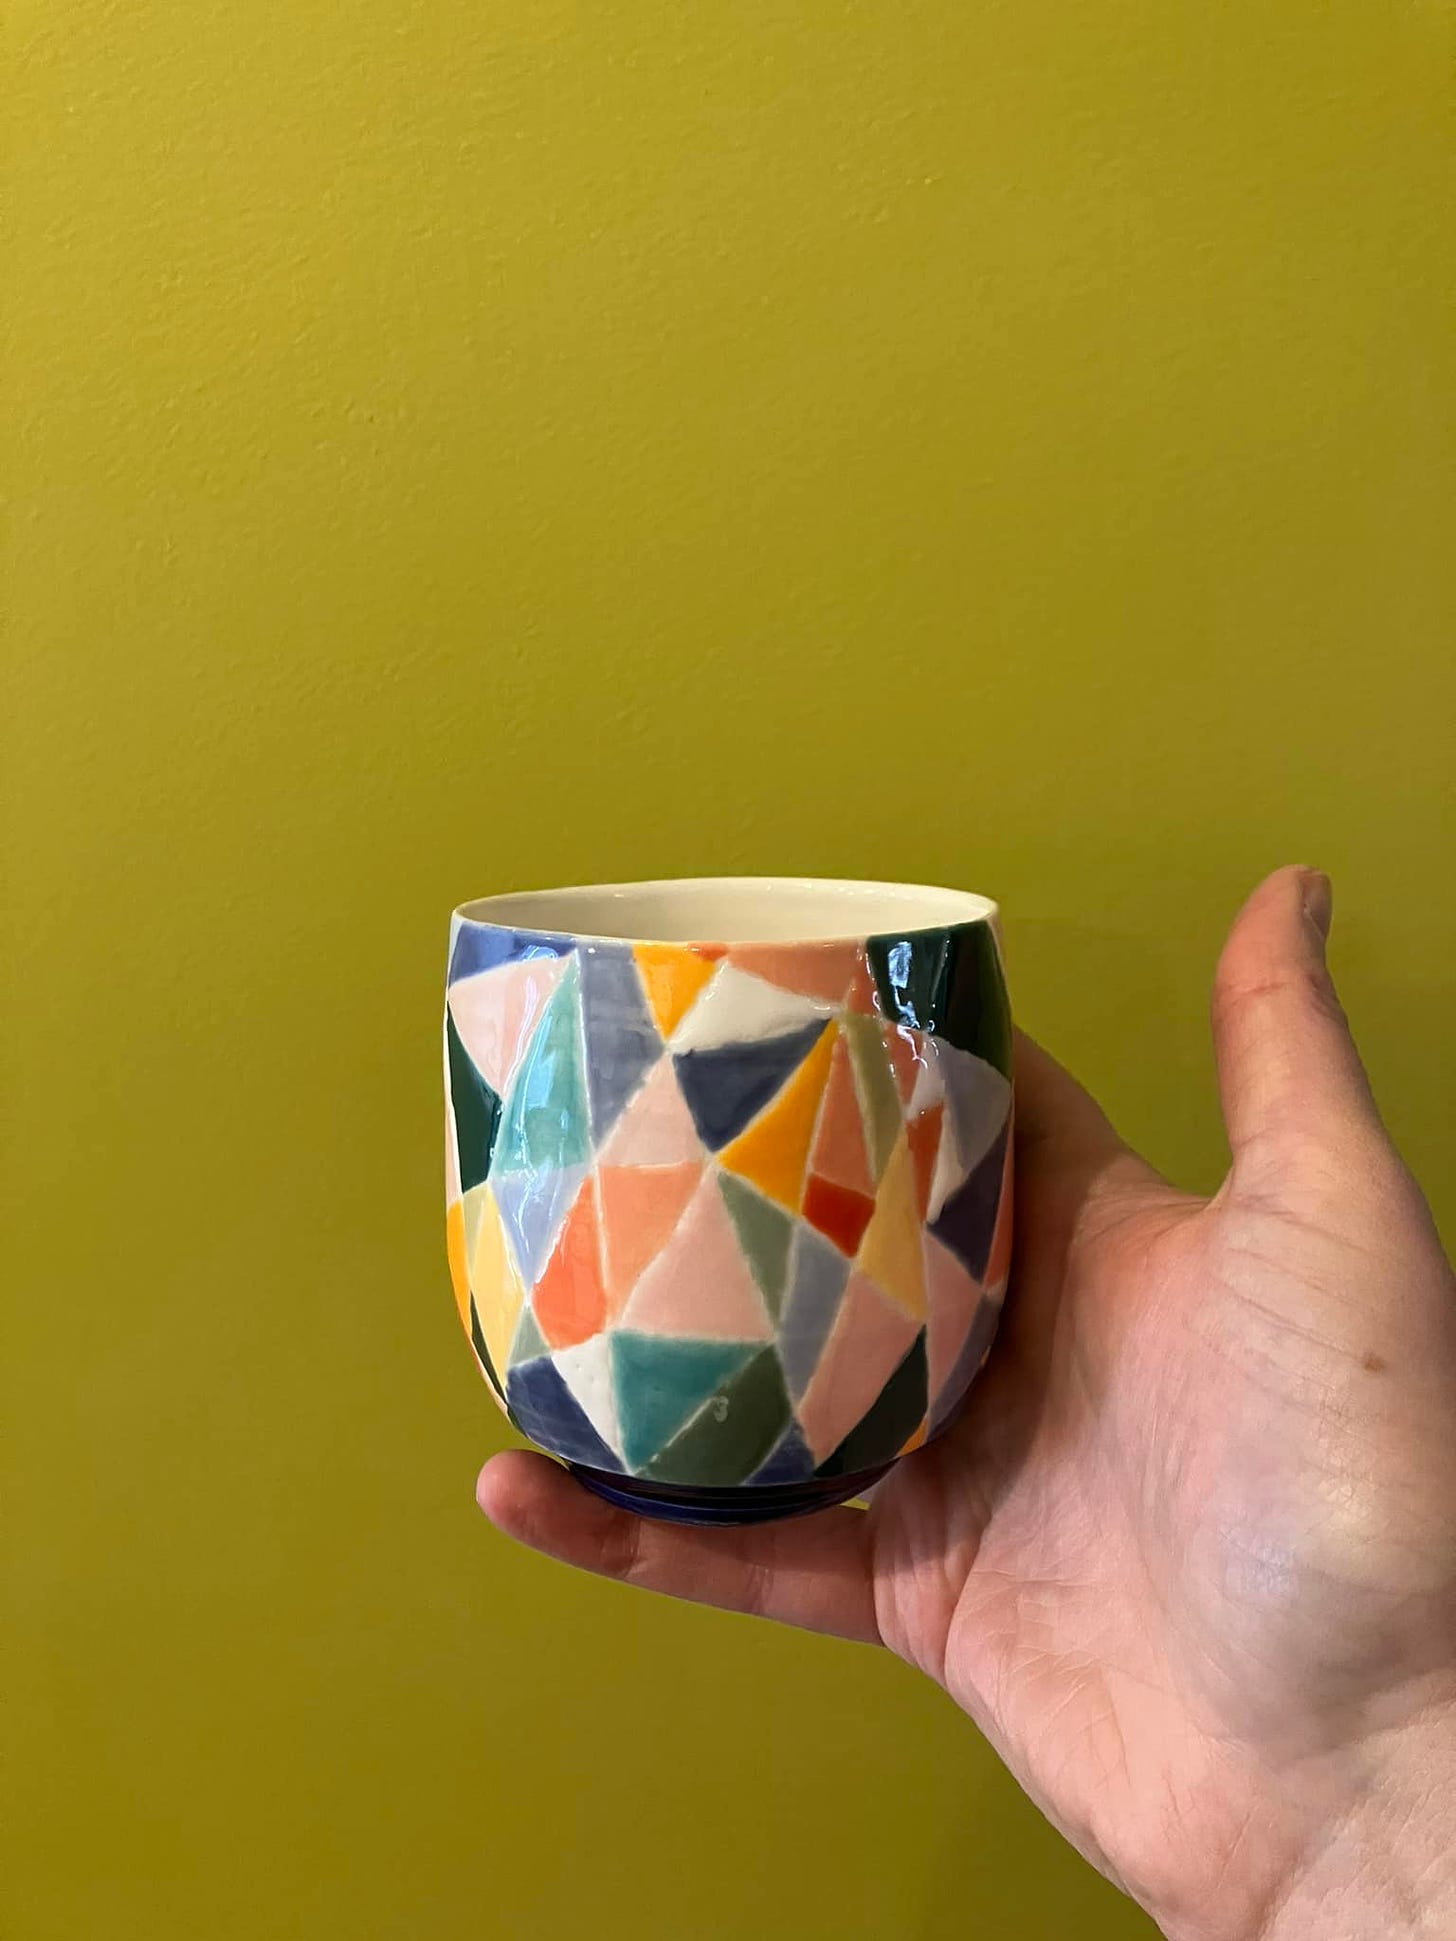 multicolored geometric cup in front of chartreuse wall, held up by one hand